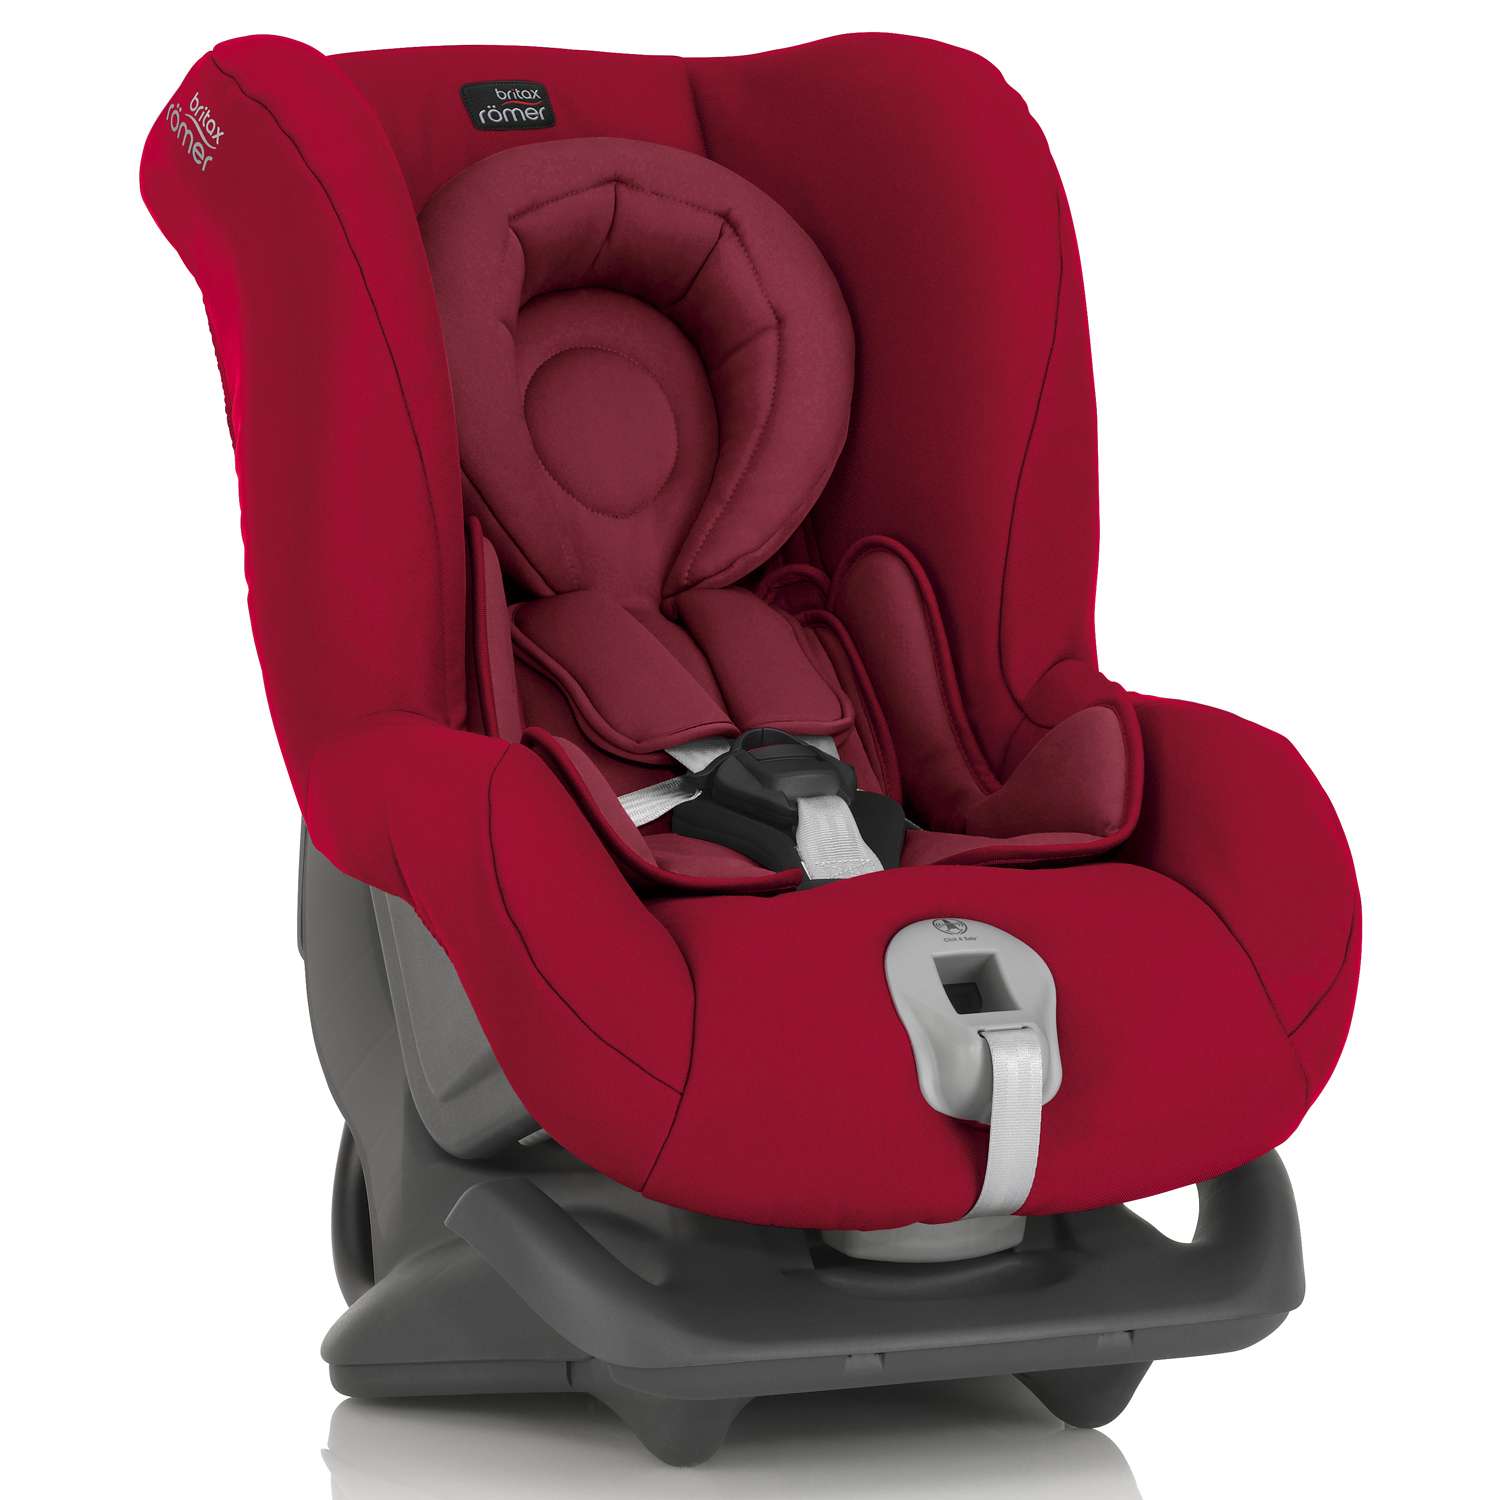 Автокресло Britax Roemer First Class Plus Flame Red - фото 5